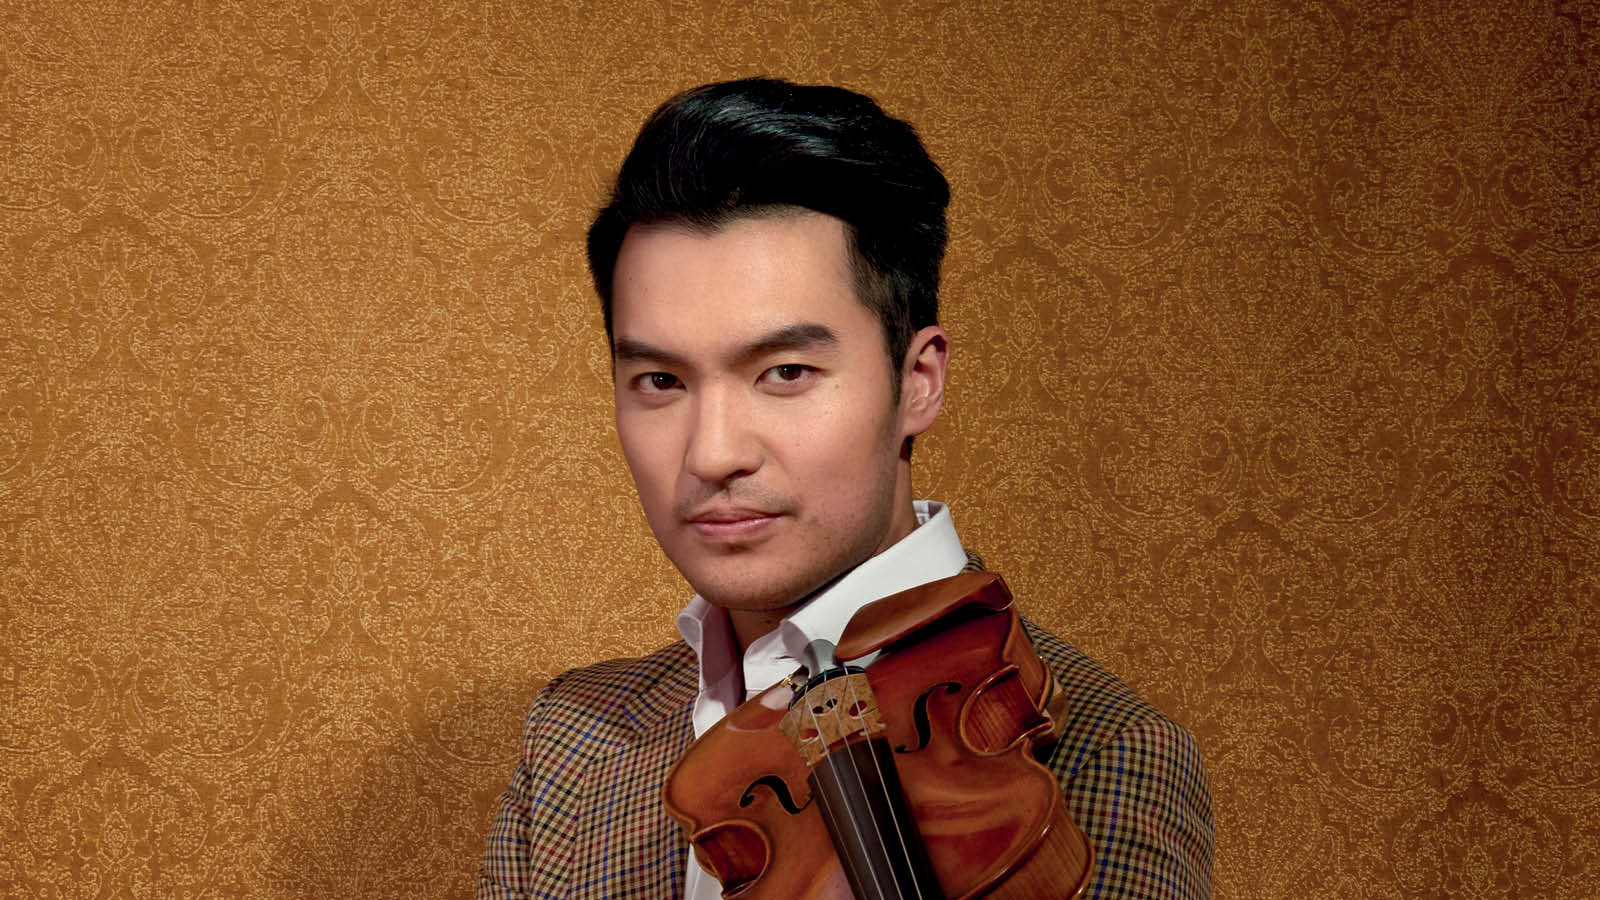 A man a brown suit holding a violin.